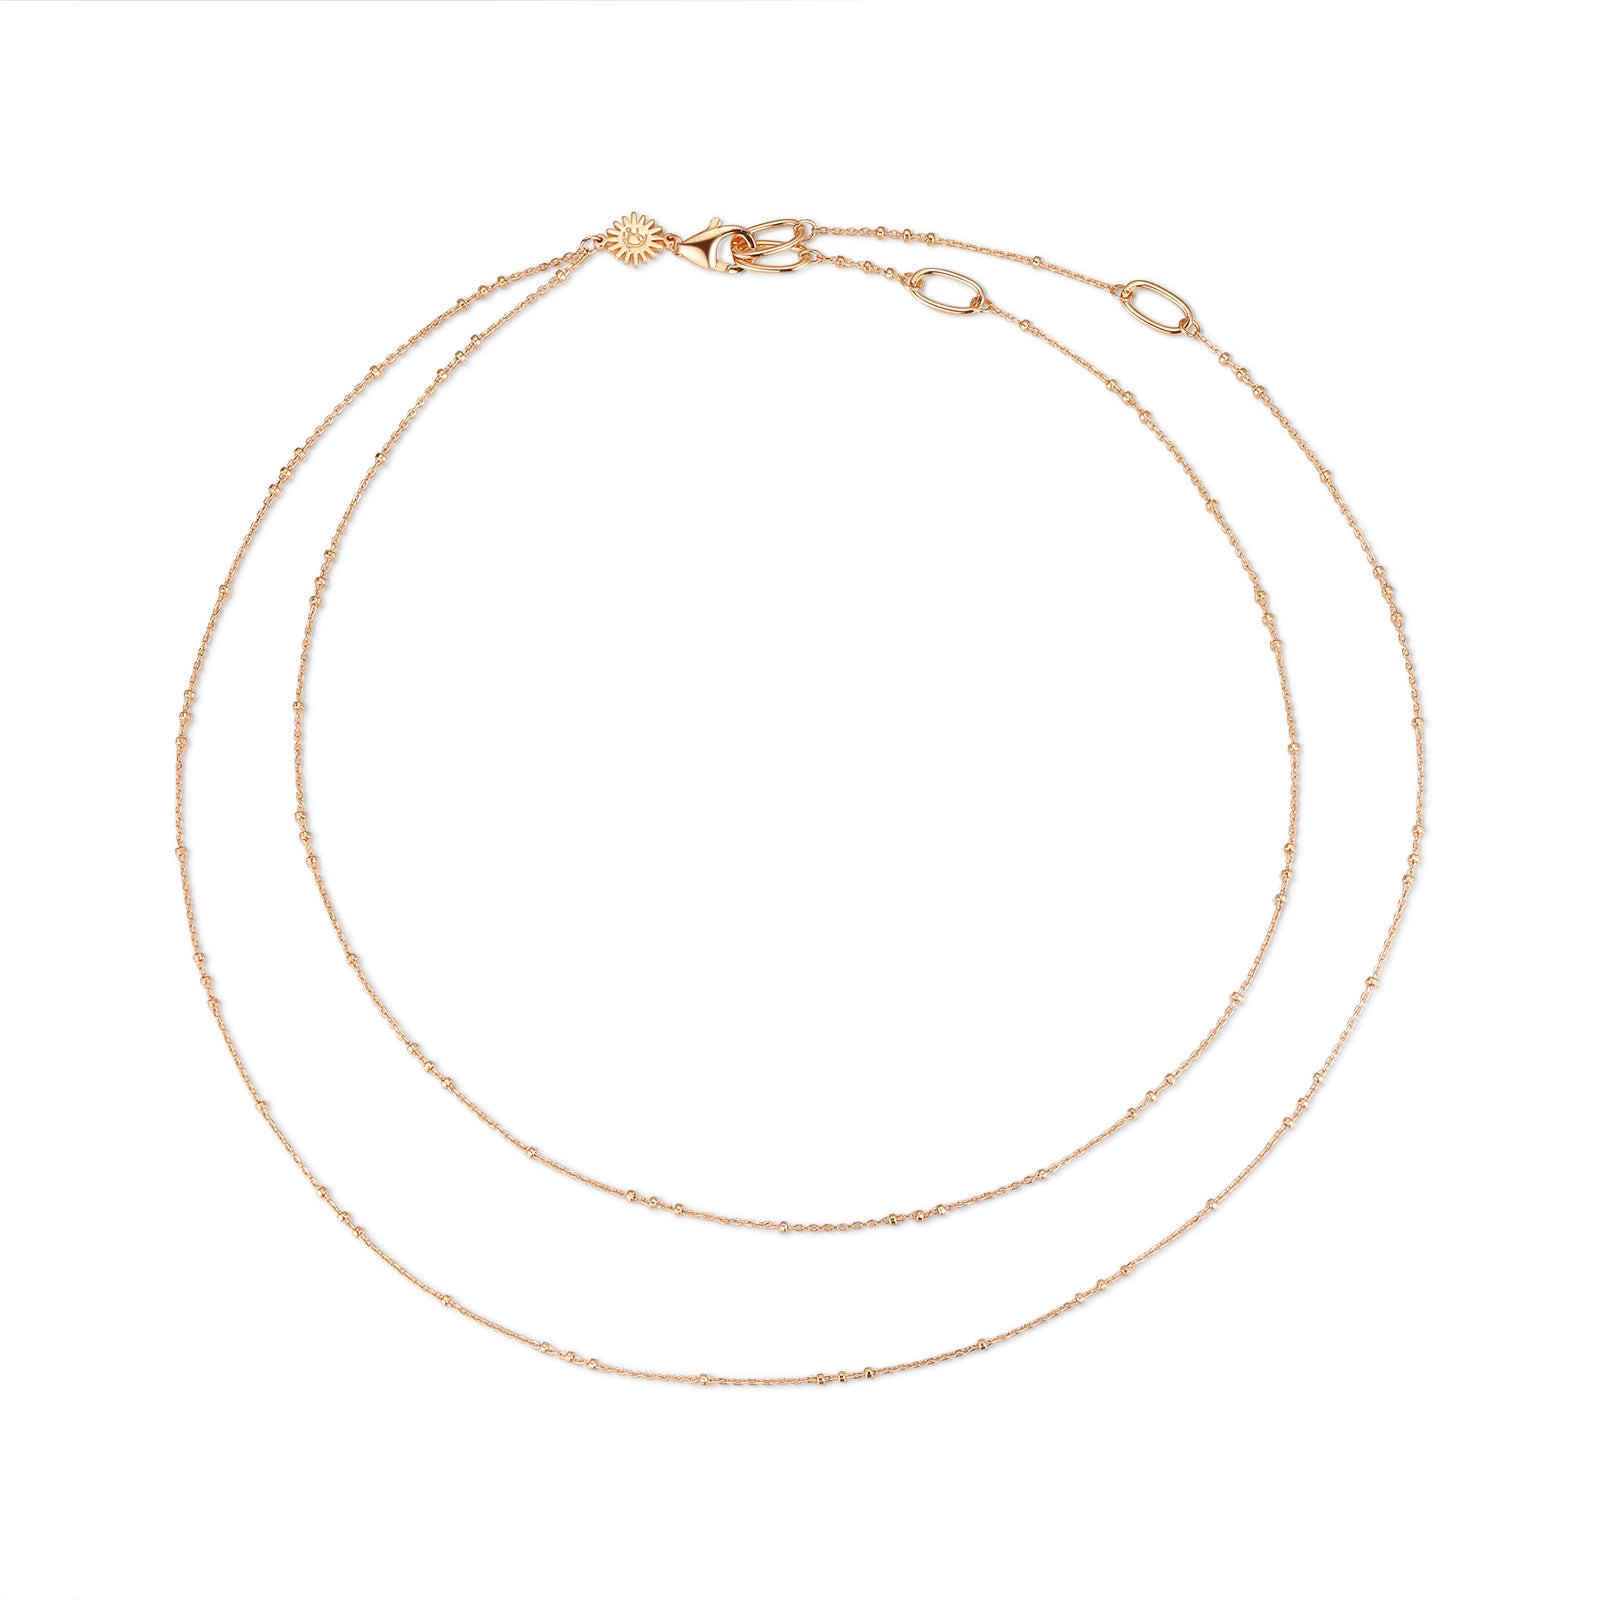 Gold Beaded Layered Necklace Chain | LOVE BY THE MOON